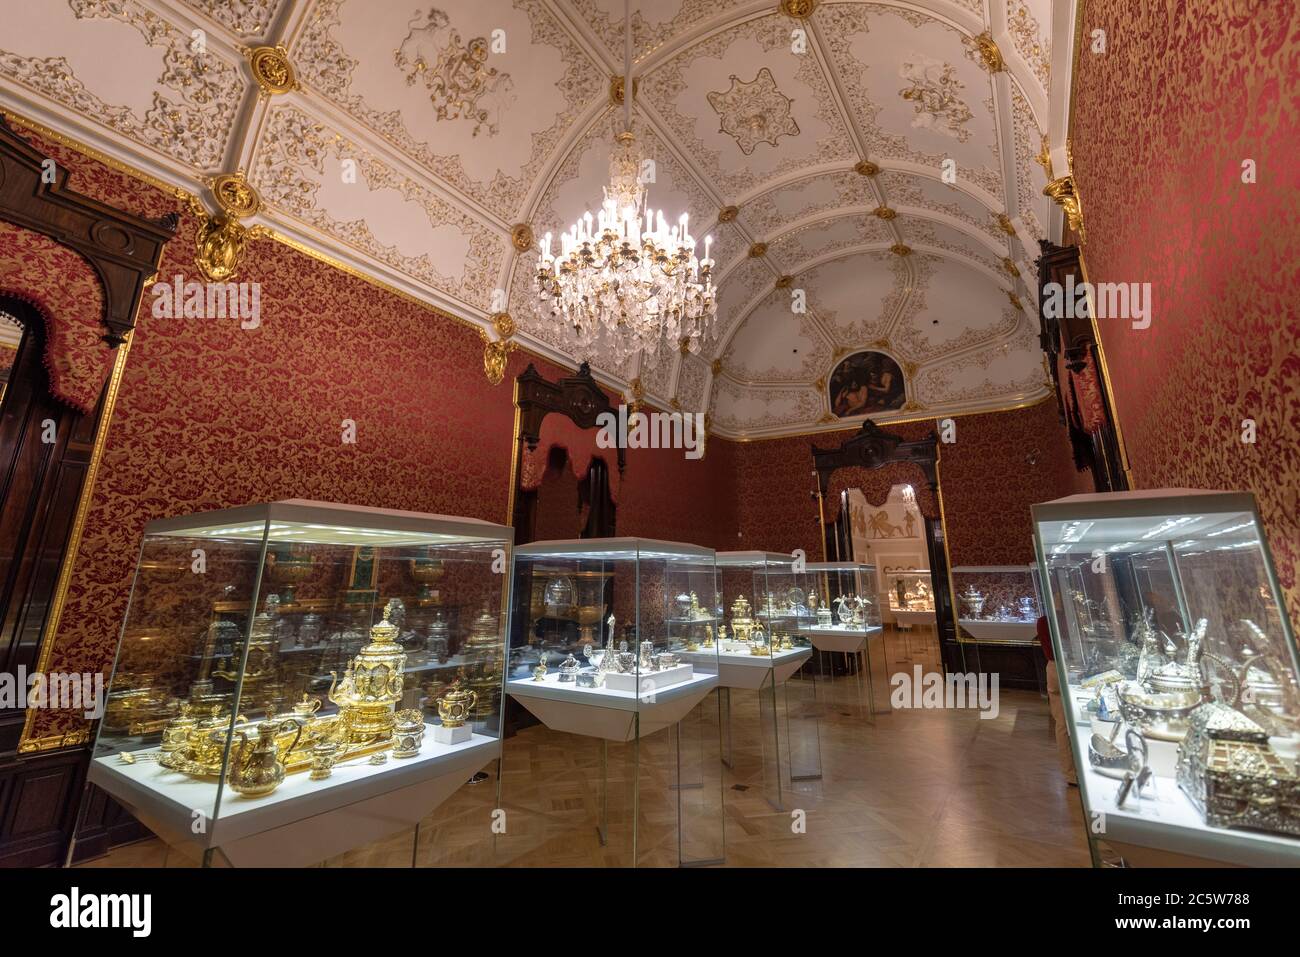 SAINT PETERSBURG. RUSSIA. Interior of Shuvalov Palace now housing the Faberge Museum in St. Petersburg Stock Photo